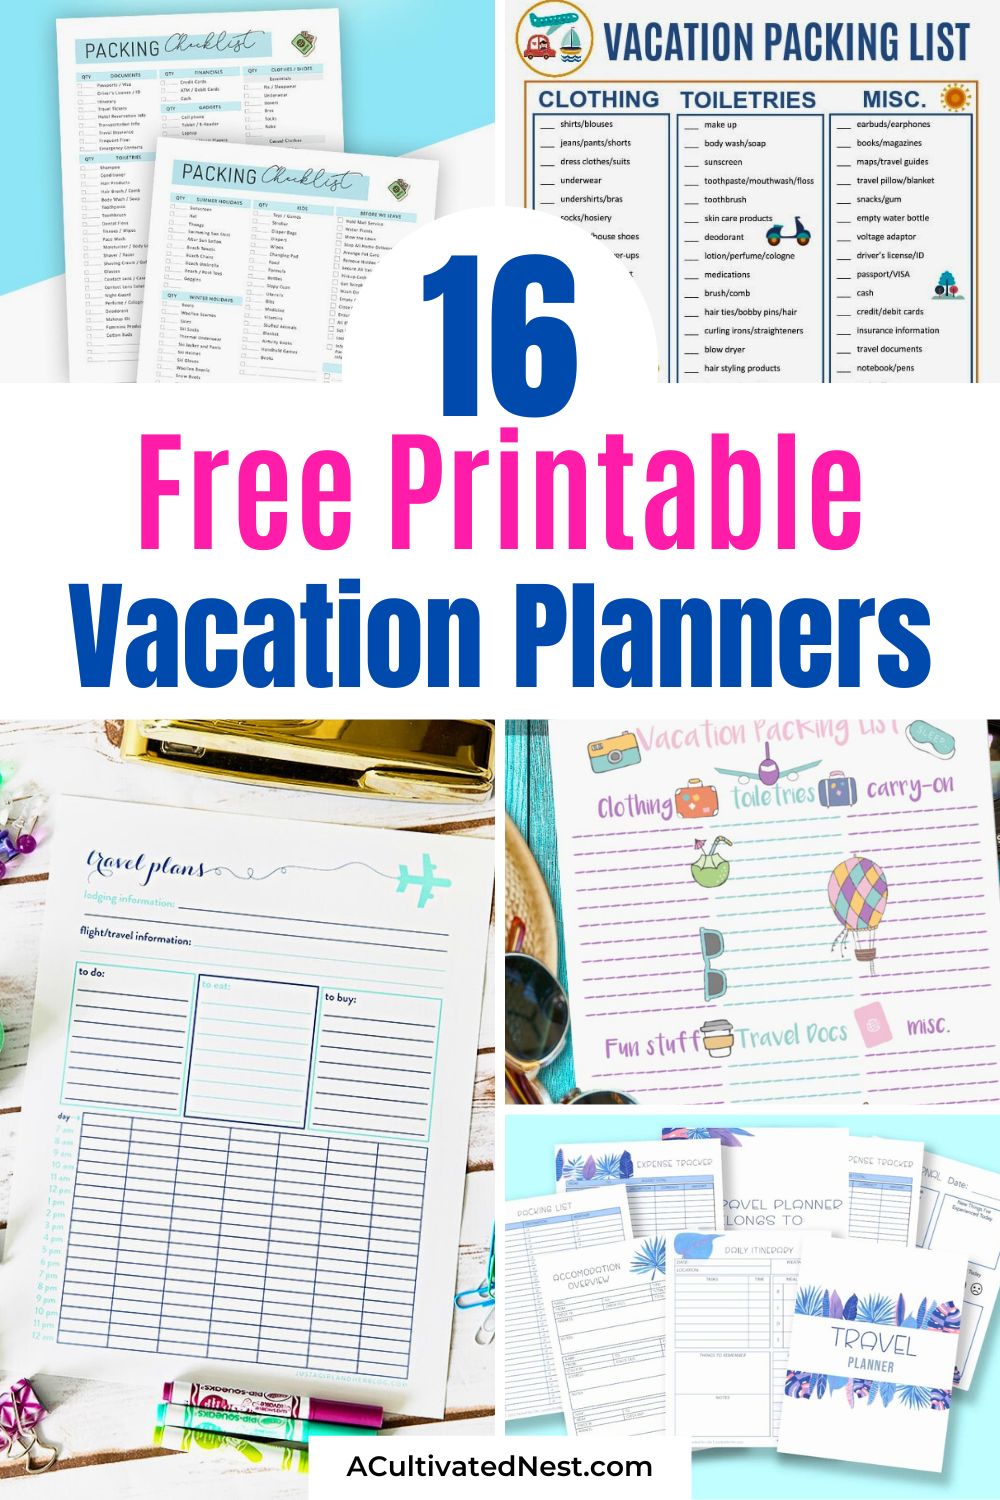 16 Free Printable Vacation Planners- Get organized for your next trip with these free printable vacation planners! Perfect for staying on top of all your travel details, from packing to itineraries. Download now and start planning your perfect getaway! | #TravelPlanner #PrintableTemplates #VacationPrep #freePrintables #ACultivatedNest